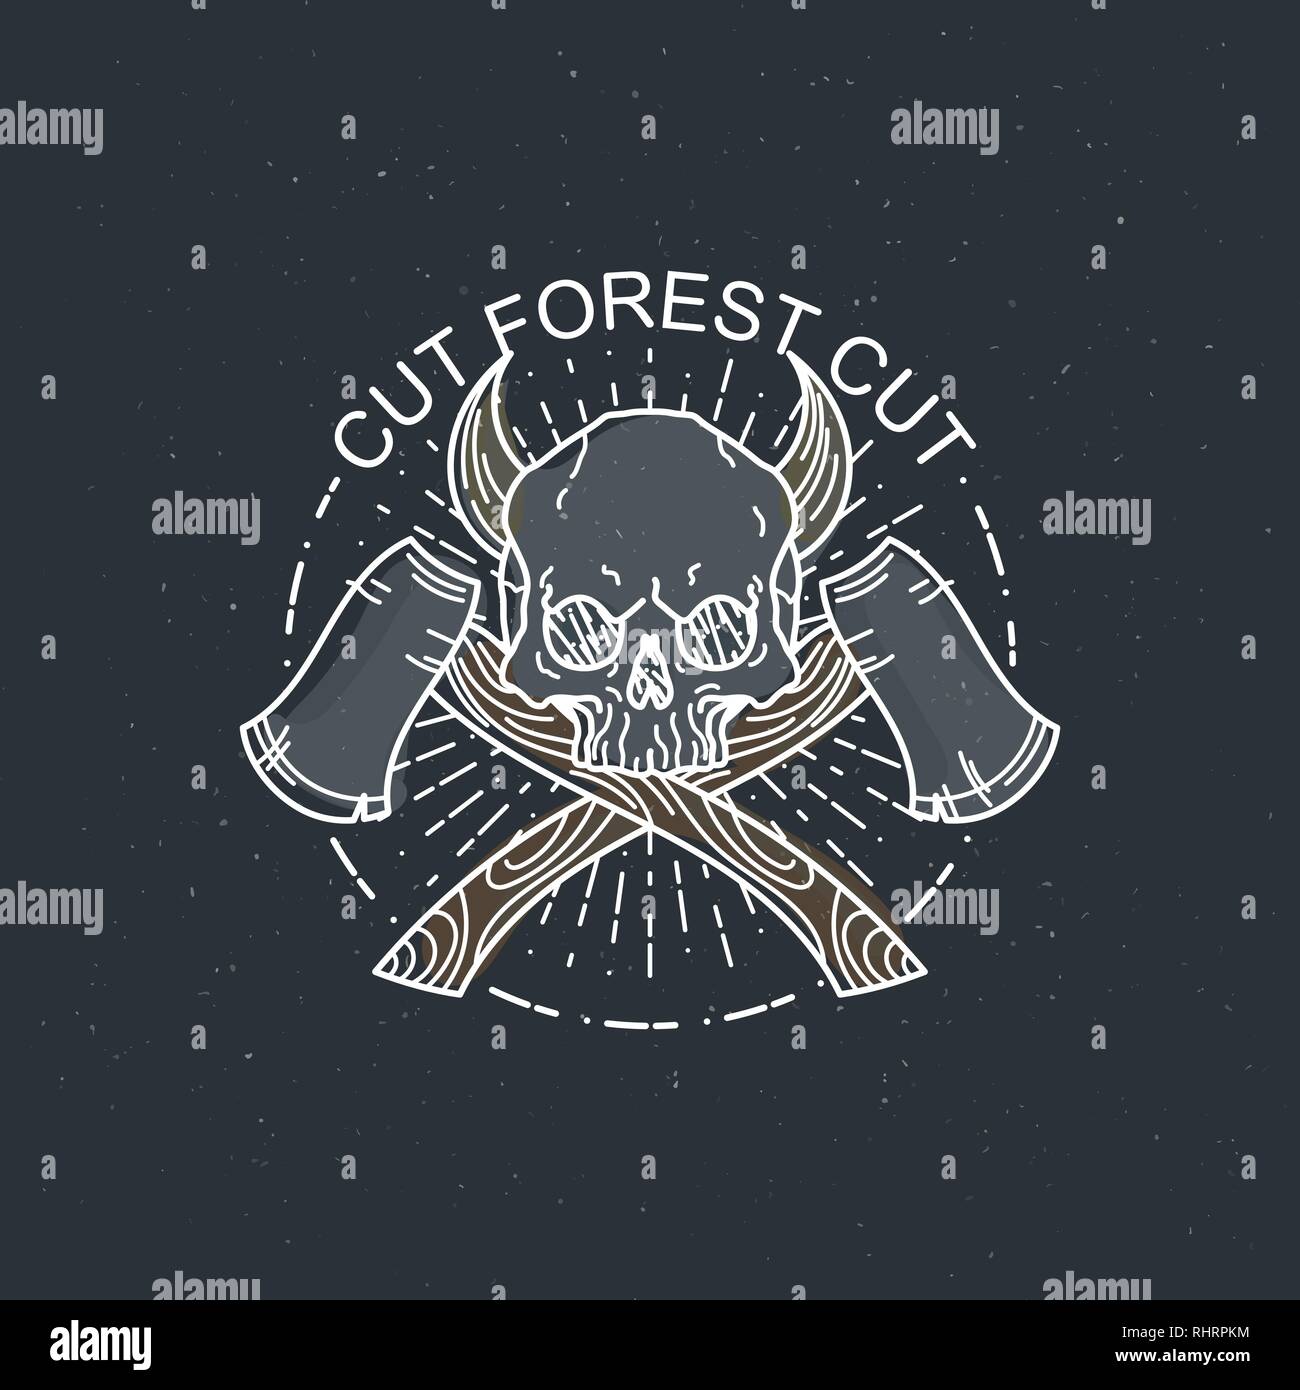 Cut forest cut. Vector illustration of color tattoo graphic human skull with axes and horns. Lined symbol Stock Vector